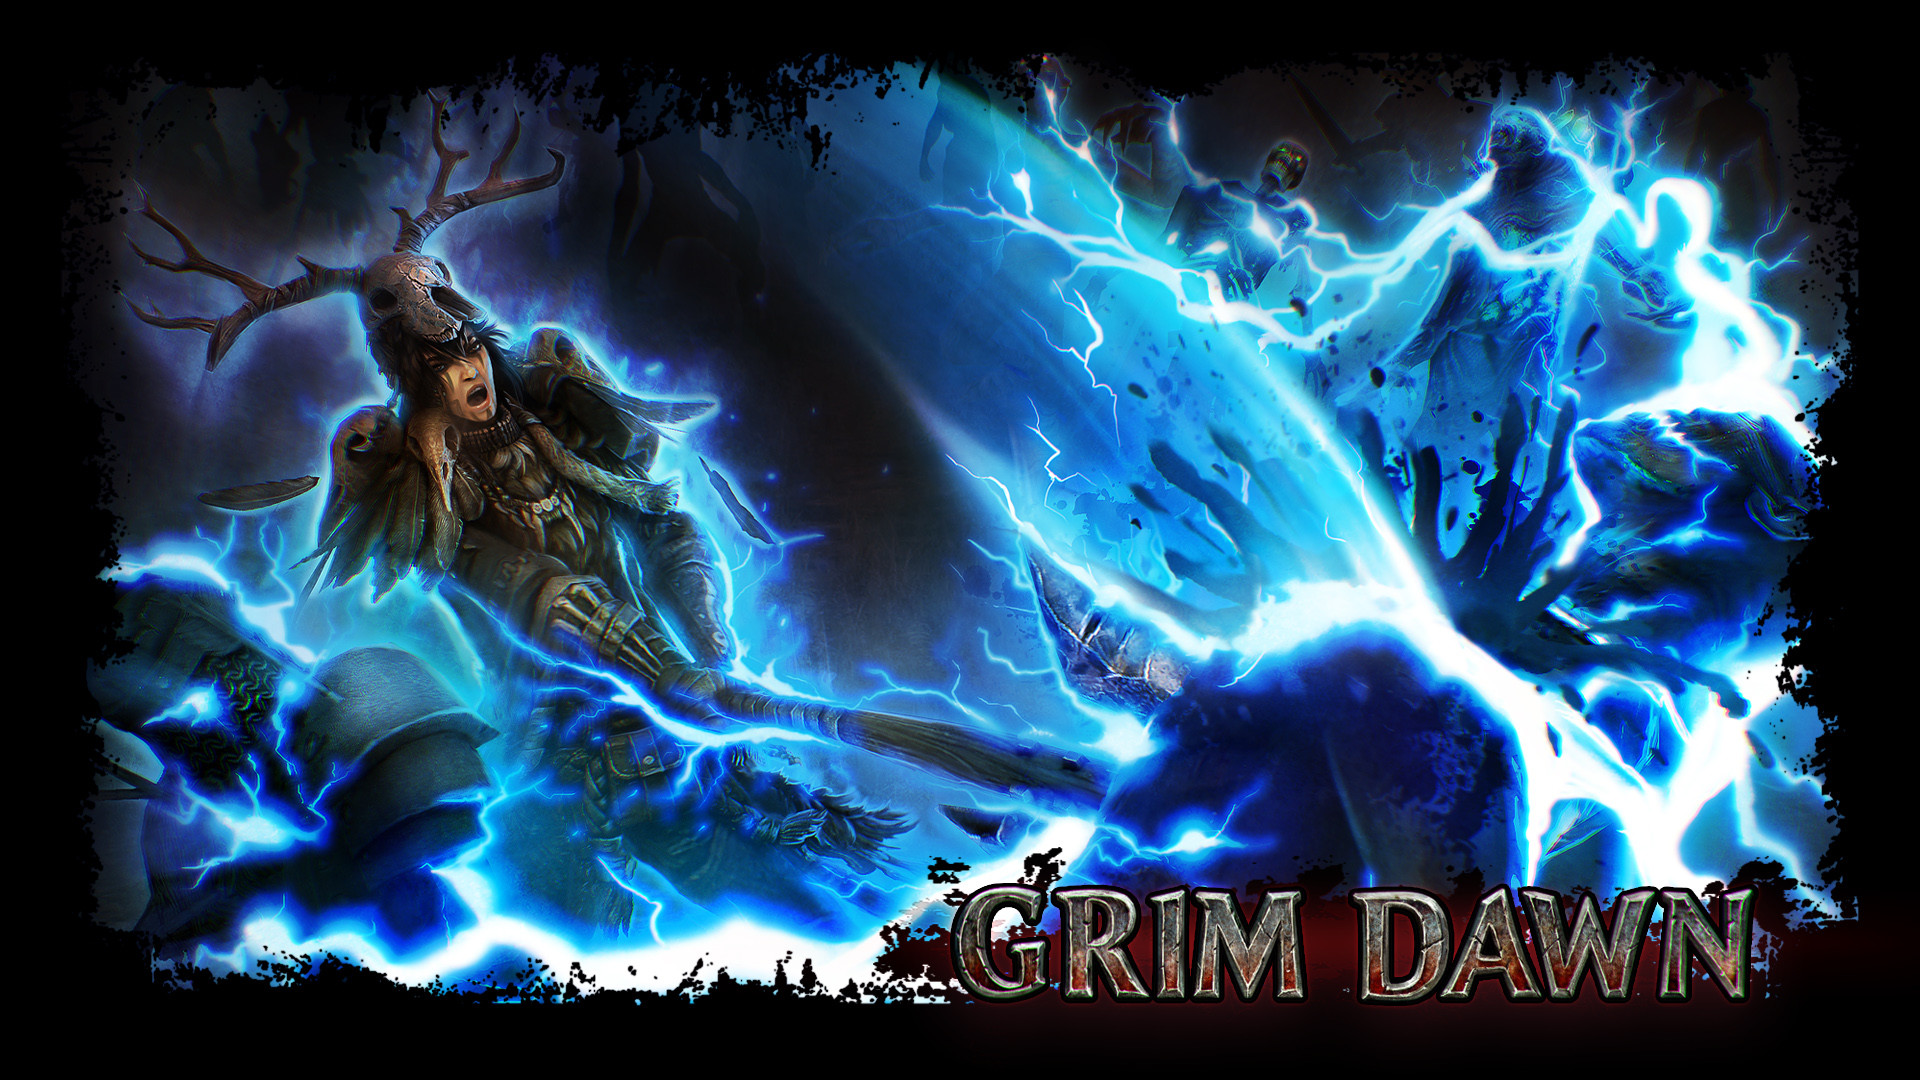 1920x1080 Shaman in action. Wallpaper from Grim Dawn